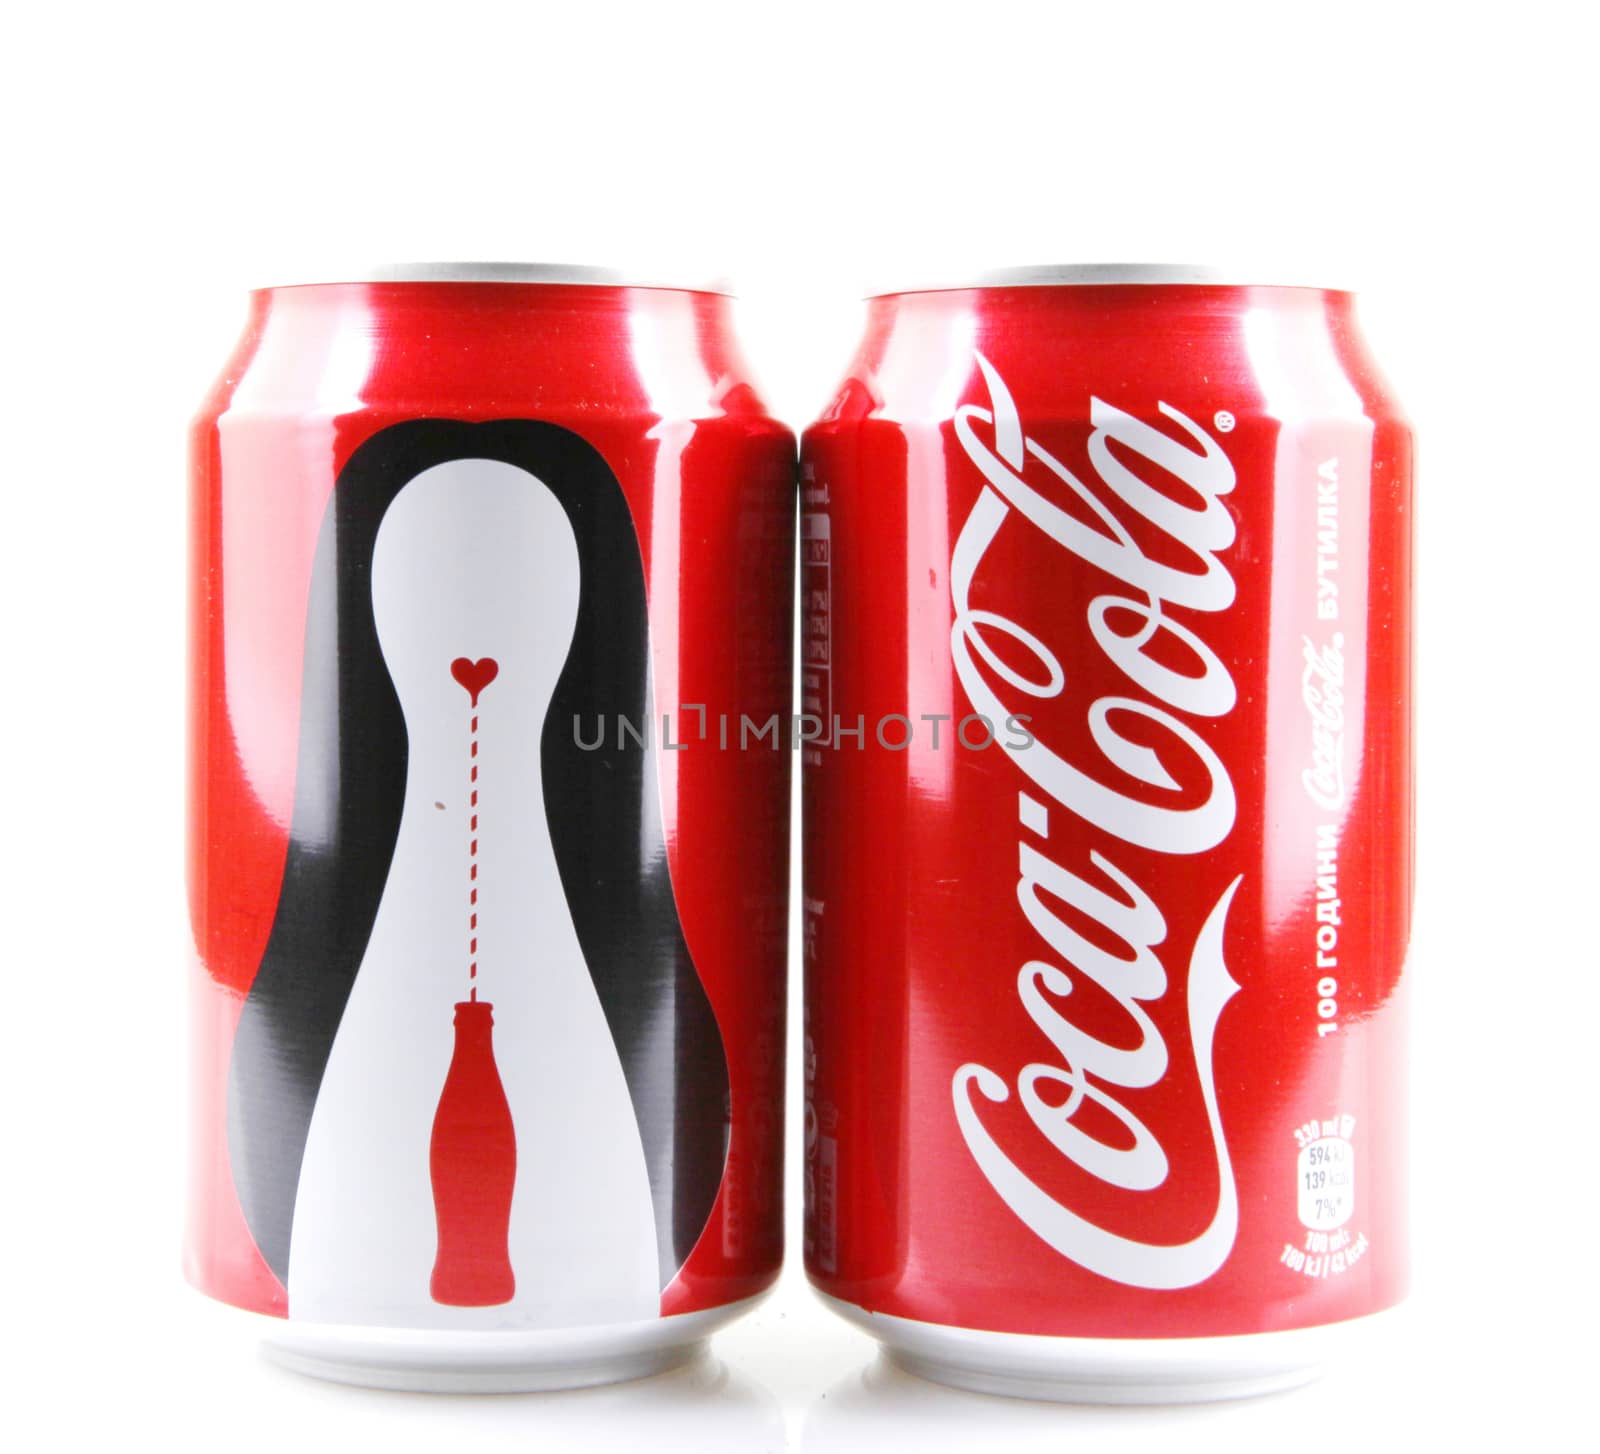 AYTOS, BULGARIA - APRIL 03, 2016: Coca-Cola isolated on white background. Coca-Cola is a carbonated soft drink sold in stores, restaurants, and vending machines throughout the world.